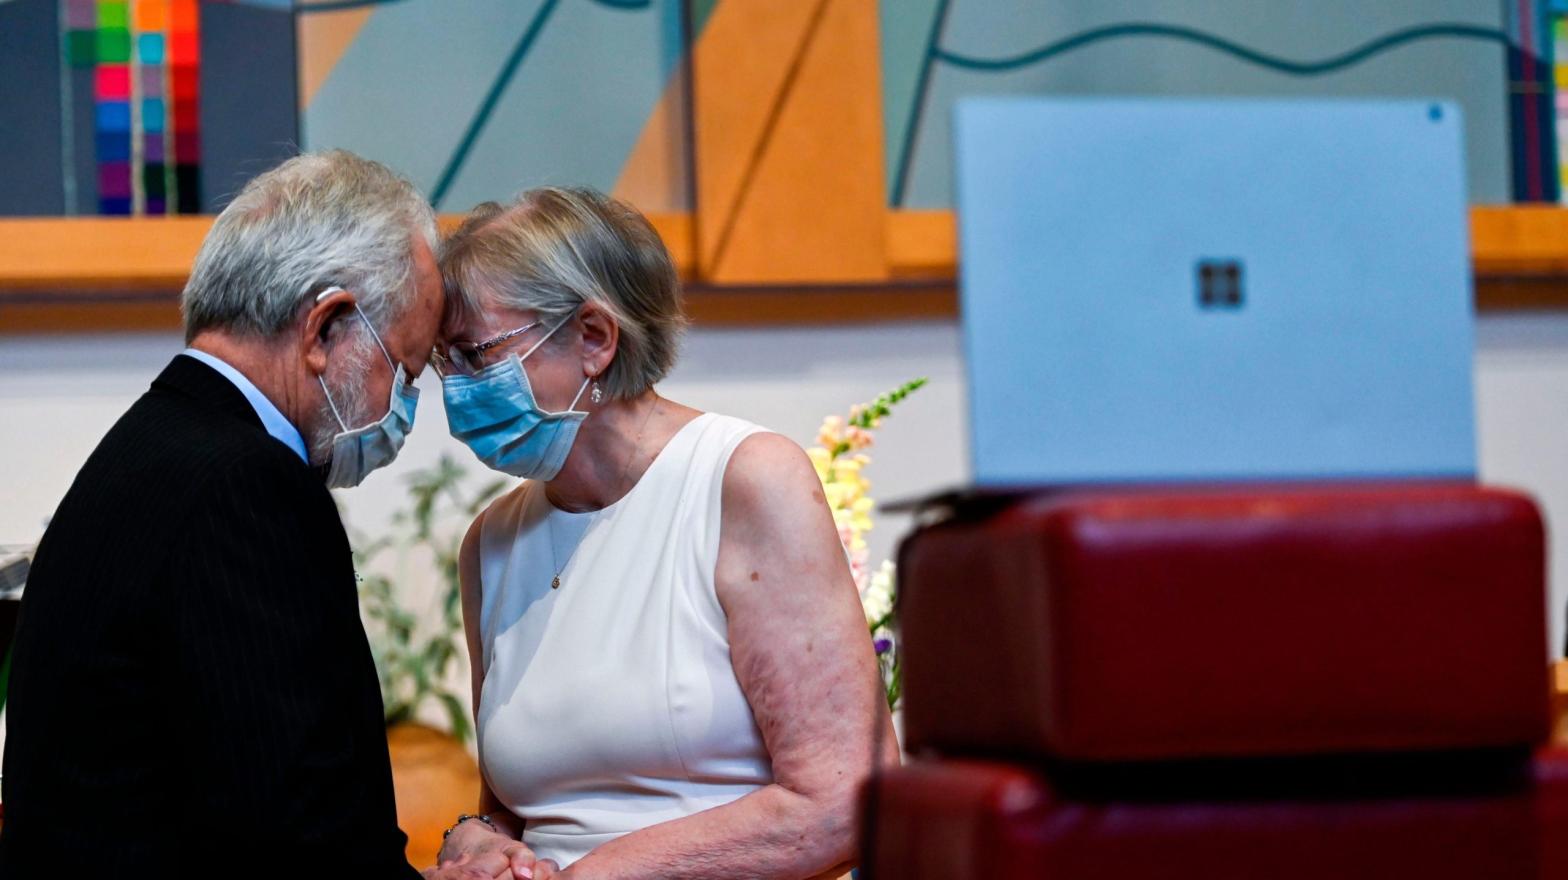 Linda Hoveskeland (R) and Ardell Hoveskeland share a moment with family and friends joining over Zoom after their socially distanced wedding at the Peace Lutheran Church in Alexandria, Virginia on May 28, 2020.  (Photo: Andrew Caballero-Reynolds / AFP, Getty Images)